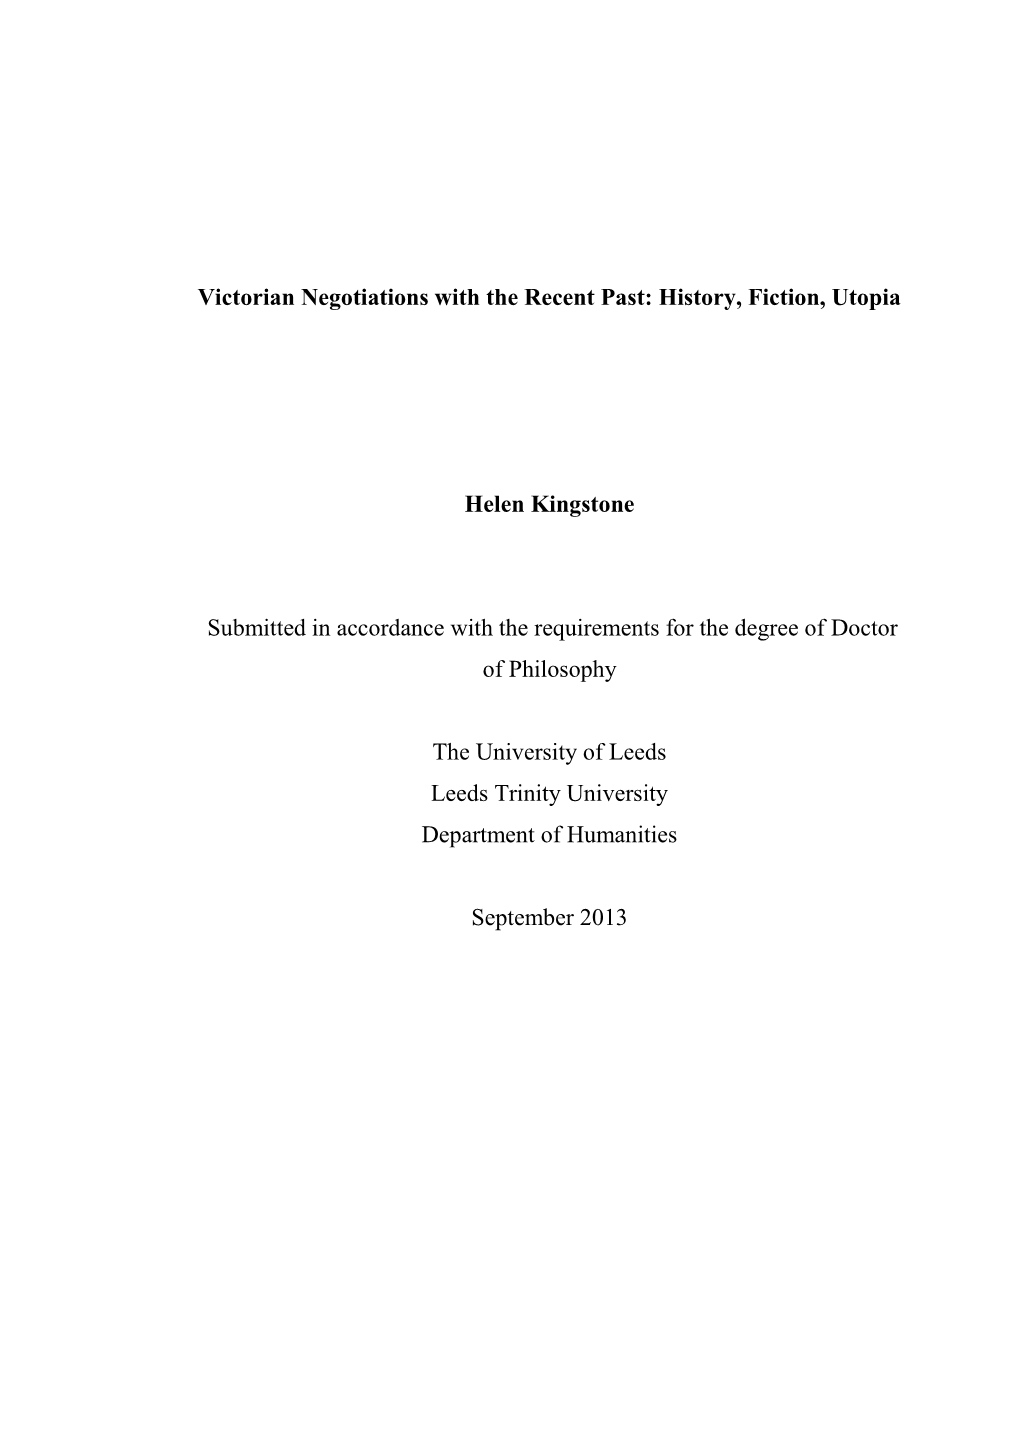 Victorian Negotiations with the Recent Past: History, Fiction, Utopia